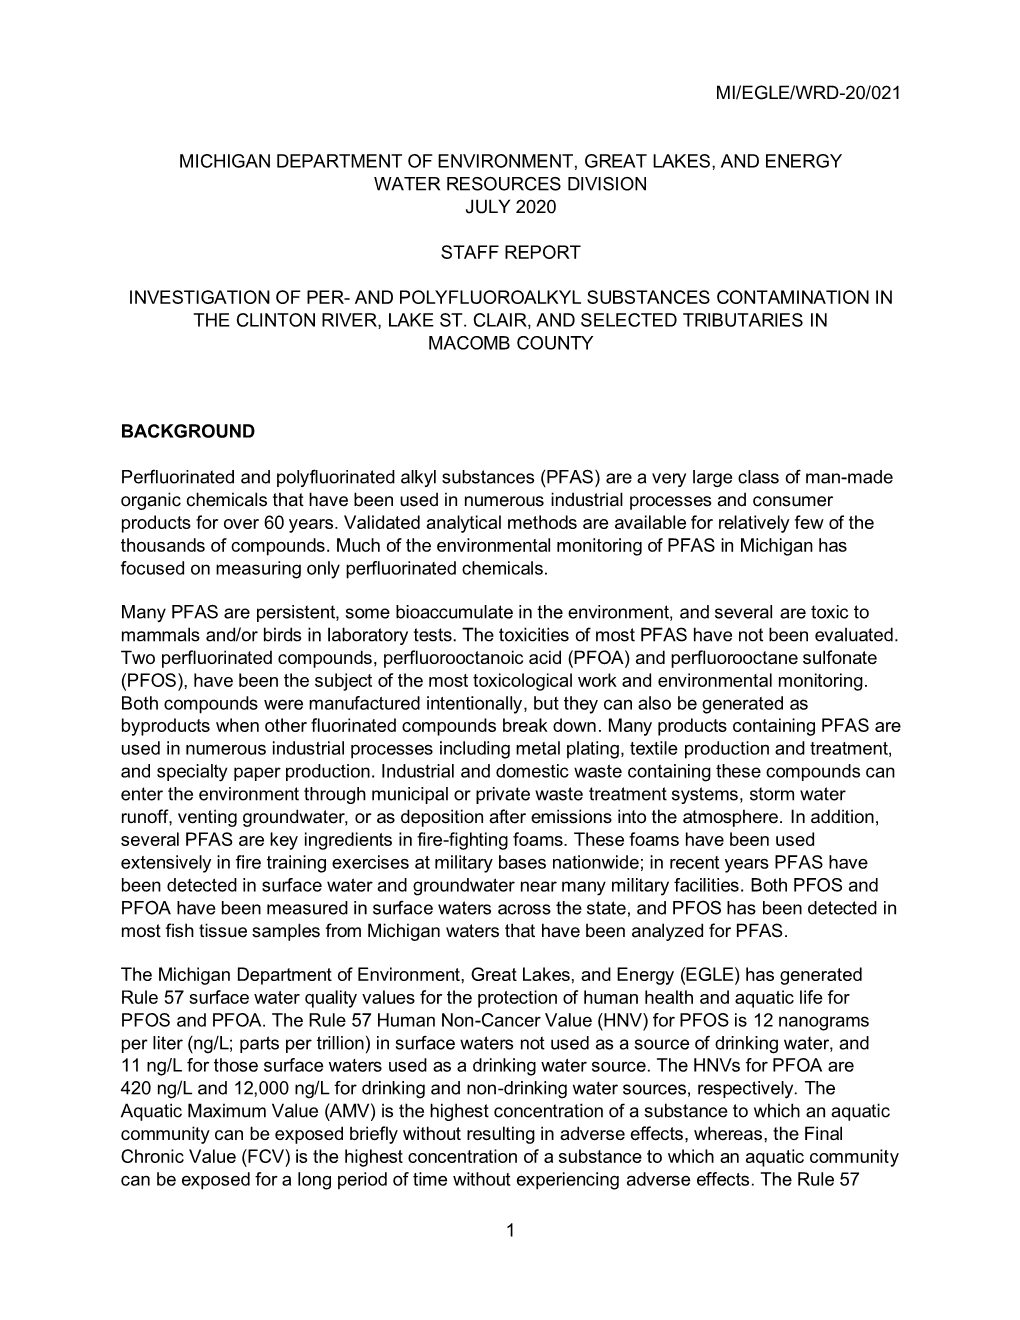 Investigation of PFAS in the Clinton River, Lake St. Clair, and Selected